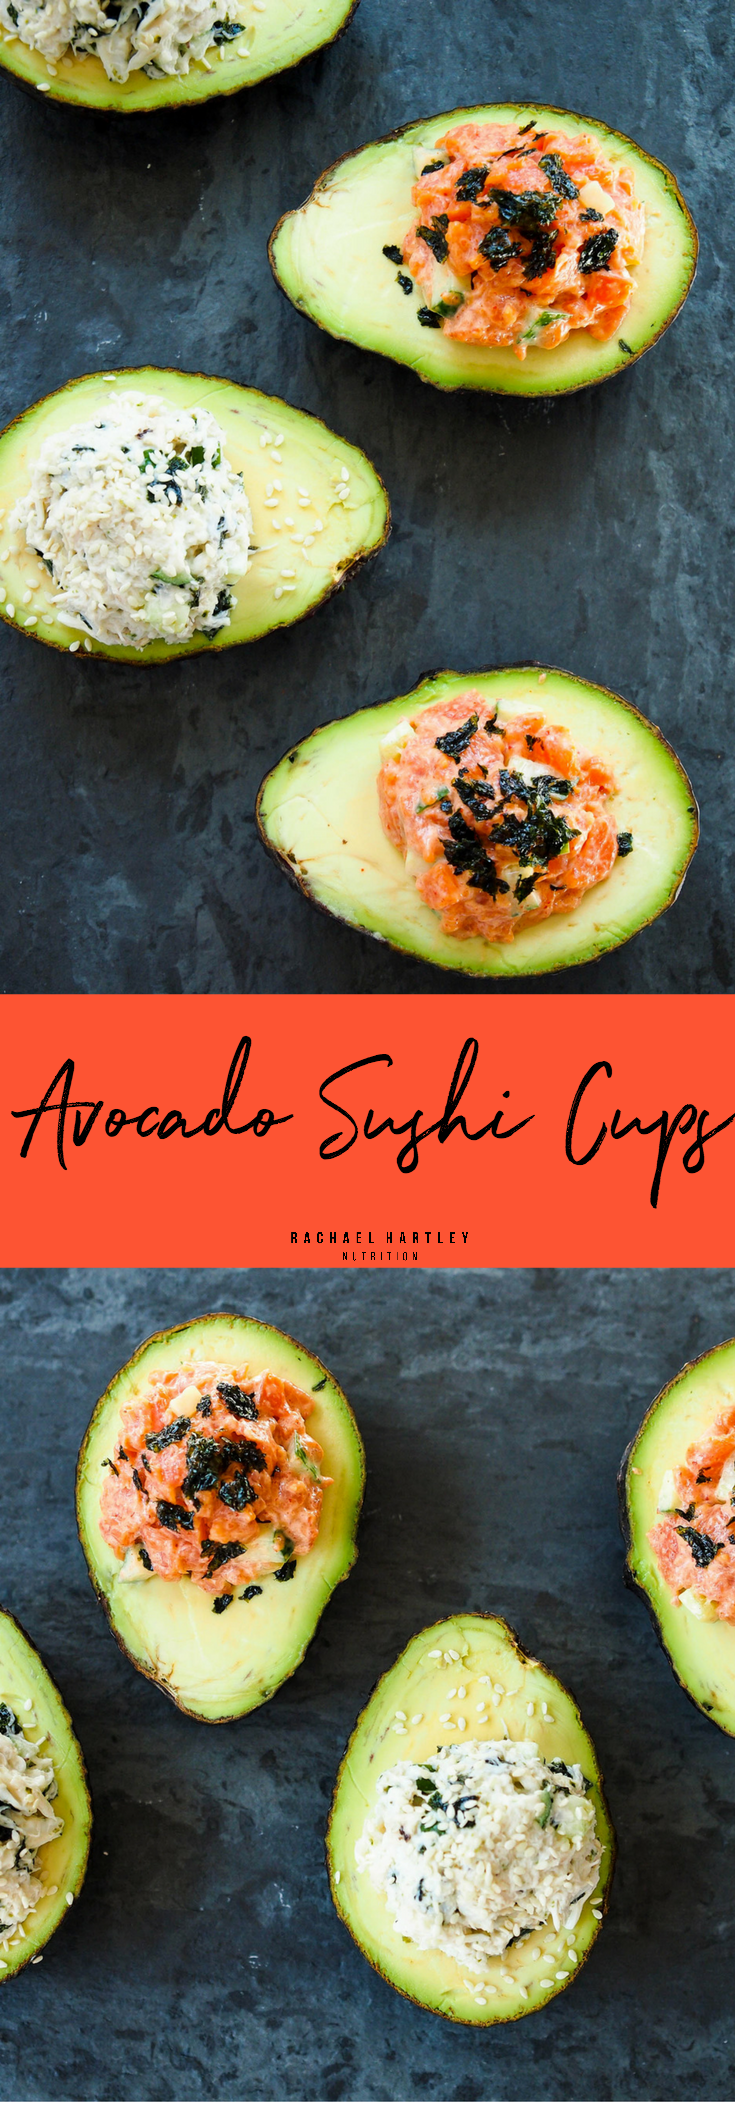 Avocado Sushi Cups - California Roll and Spicy Smoked Salmon — Registered  Dietitian Columbia SC - Rachael Hartley Nutrition